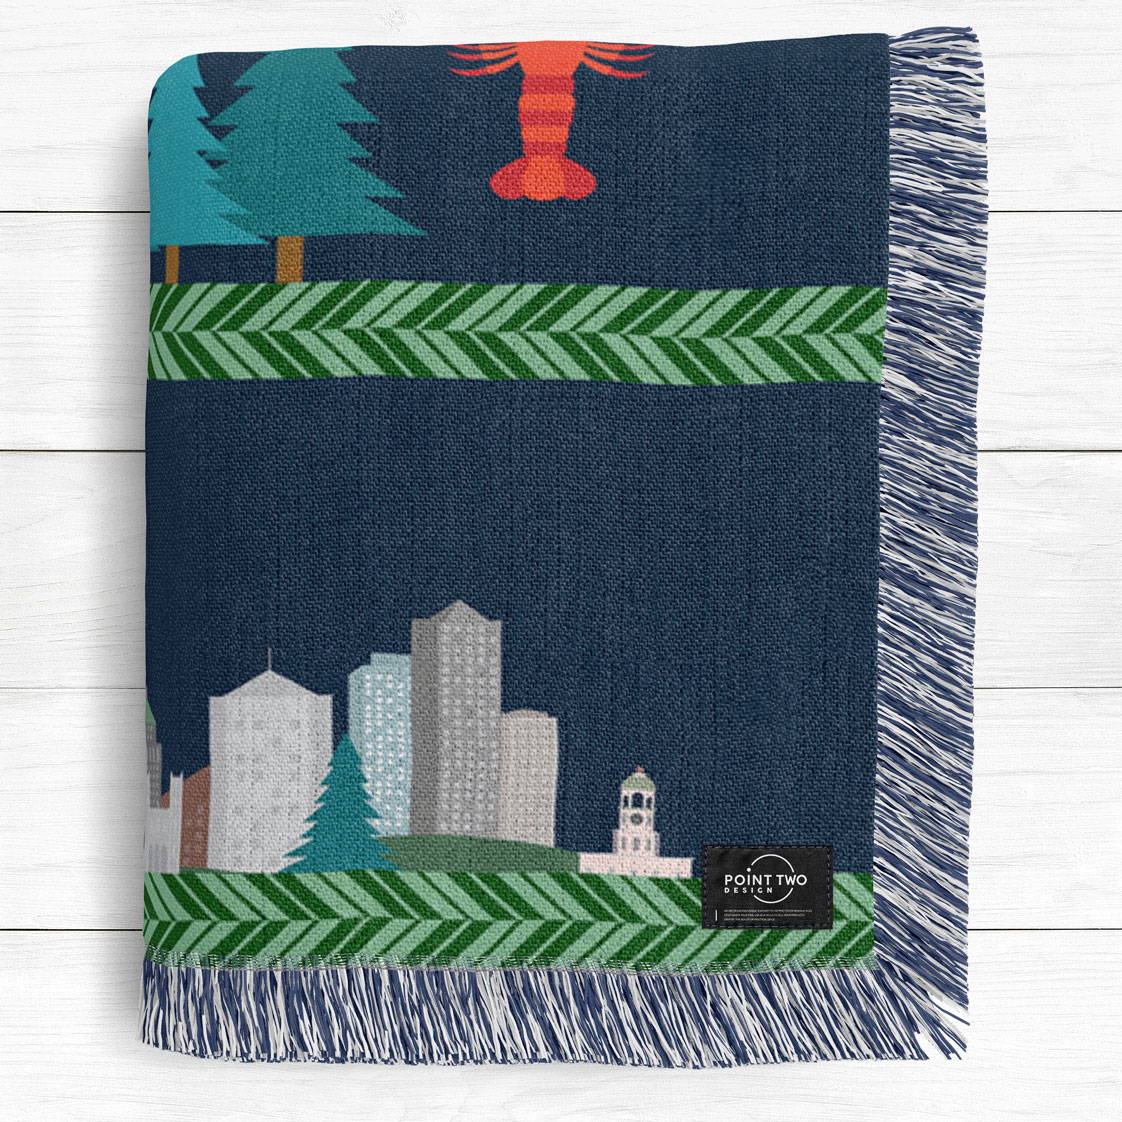 modern illustrated artwork of Canada from north to south as a cotton woven blanket